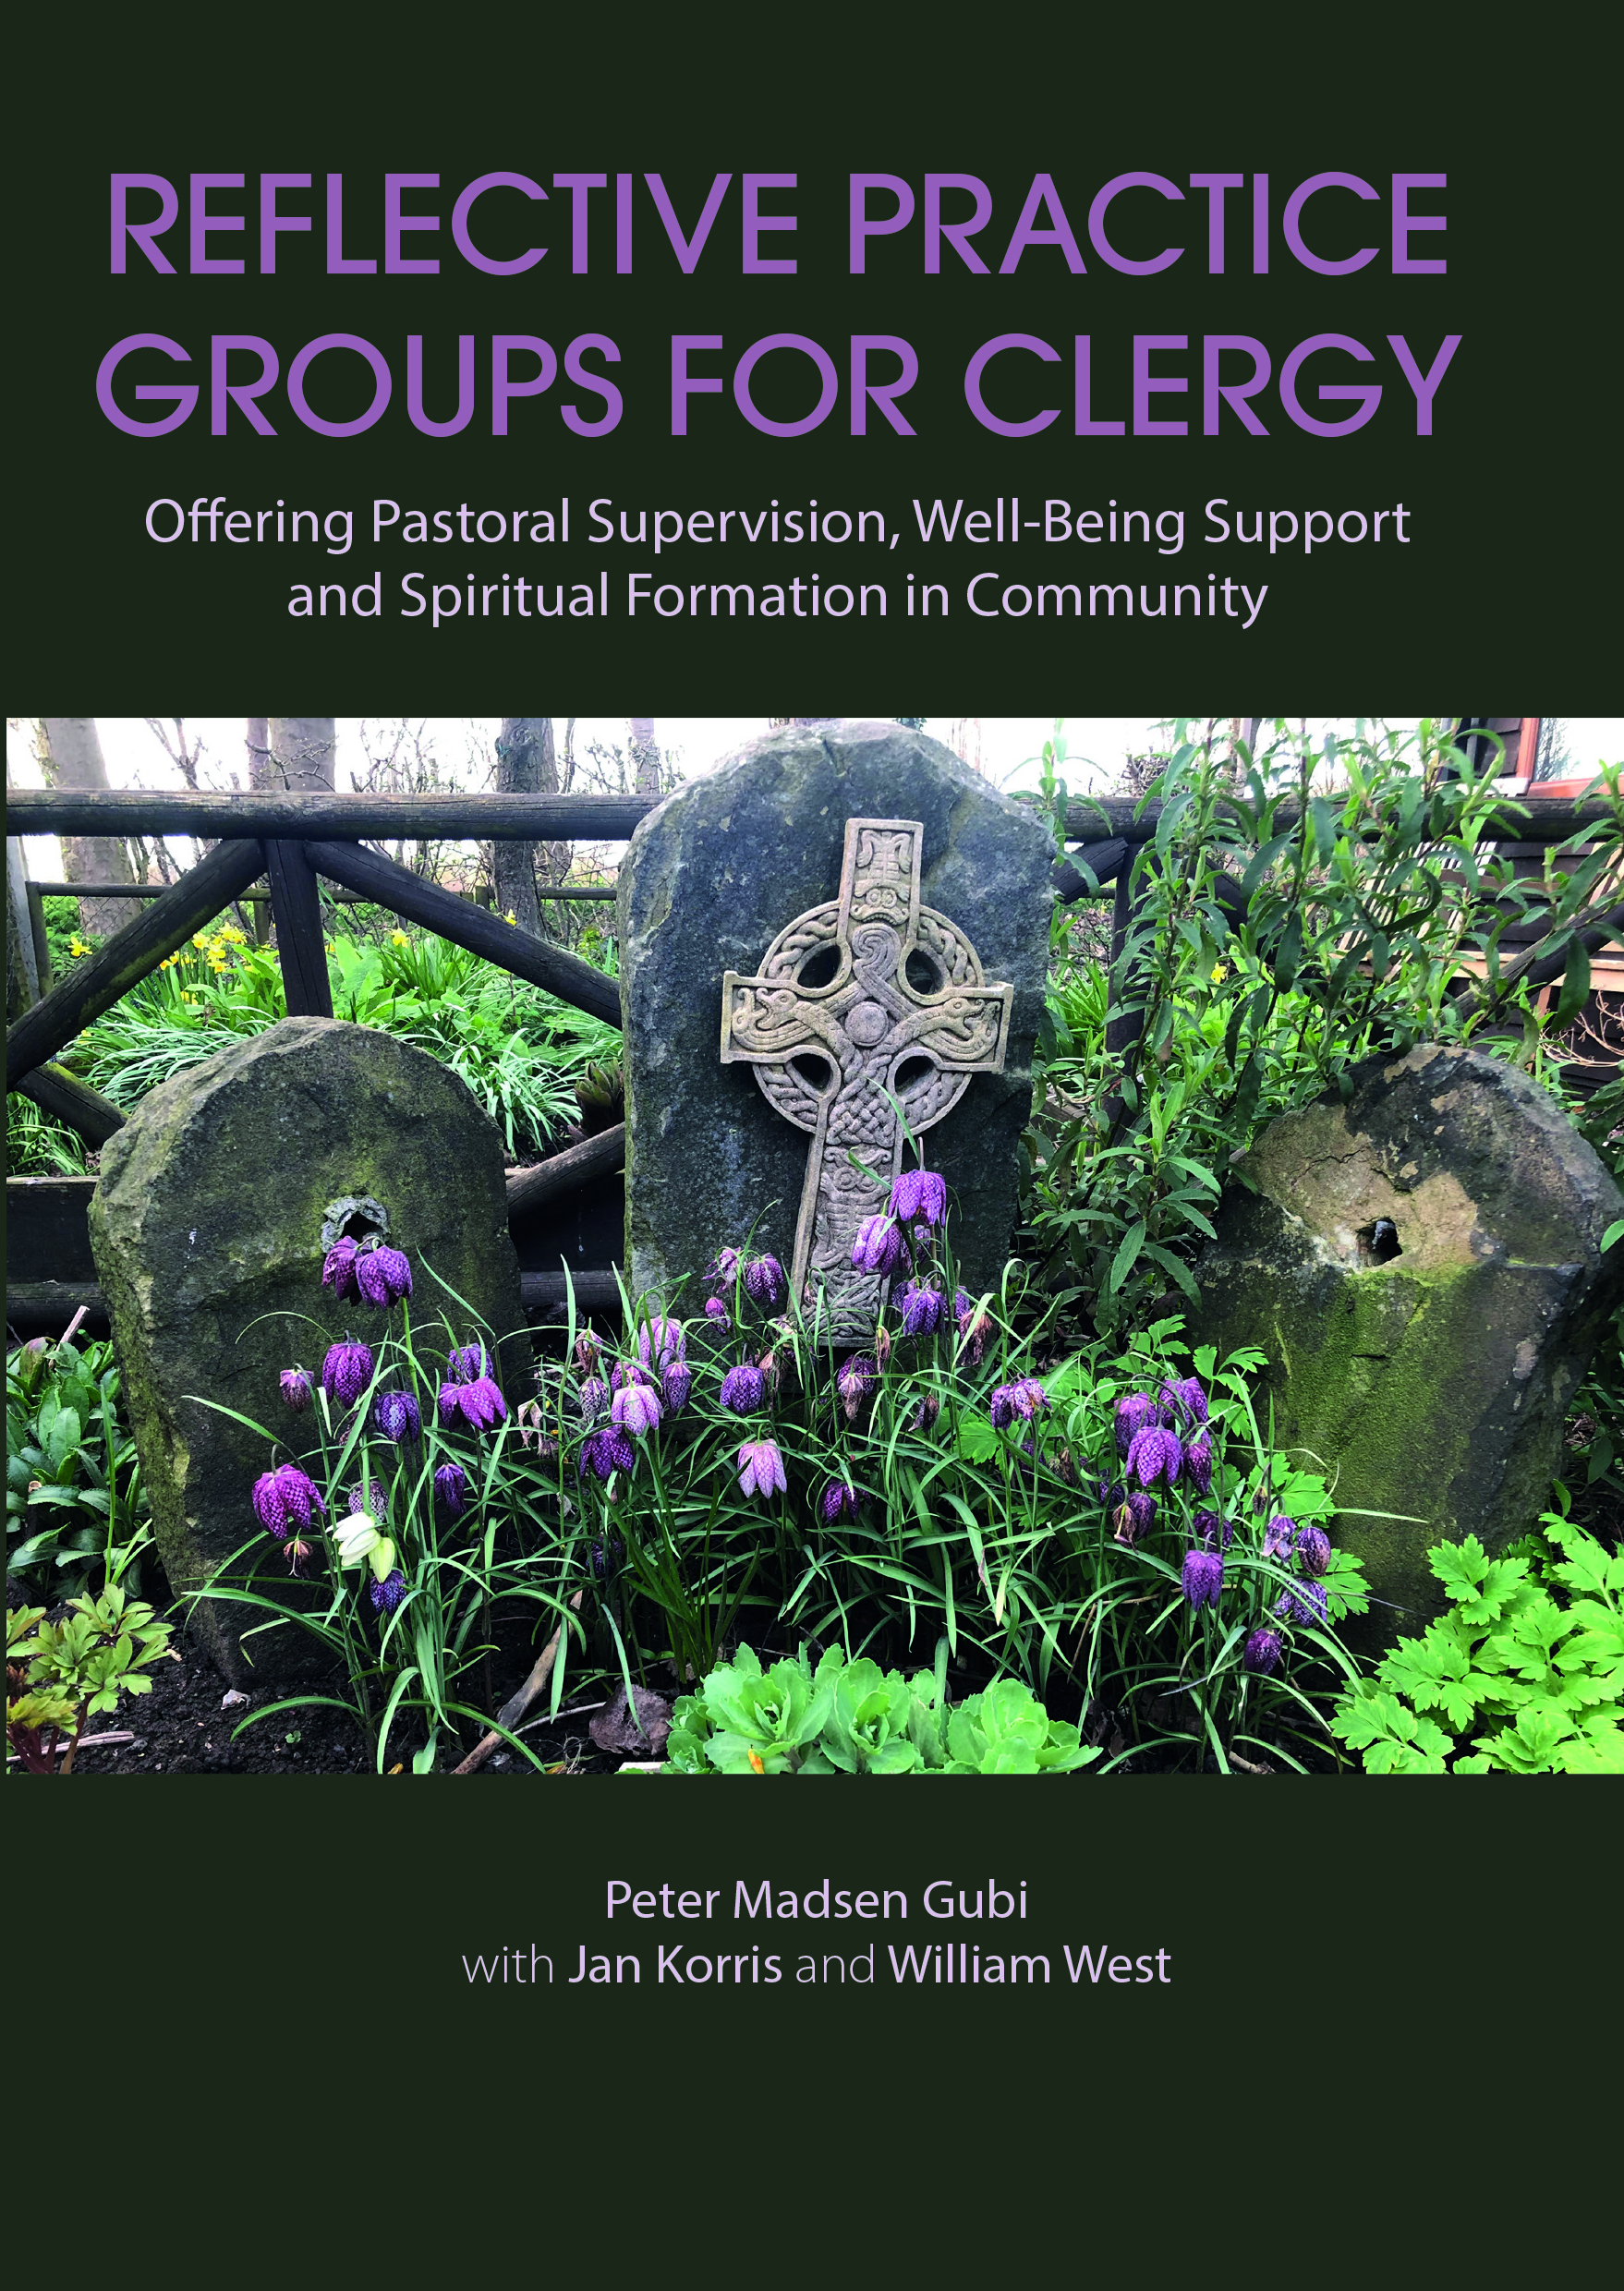 Reflective Practice Groups for Clergy: Offering Pastoral Supervision, Well-Being Support and Spiritual Formation in Community